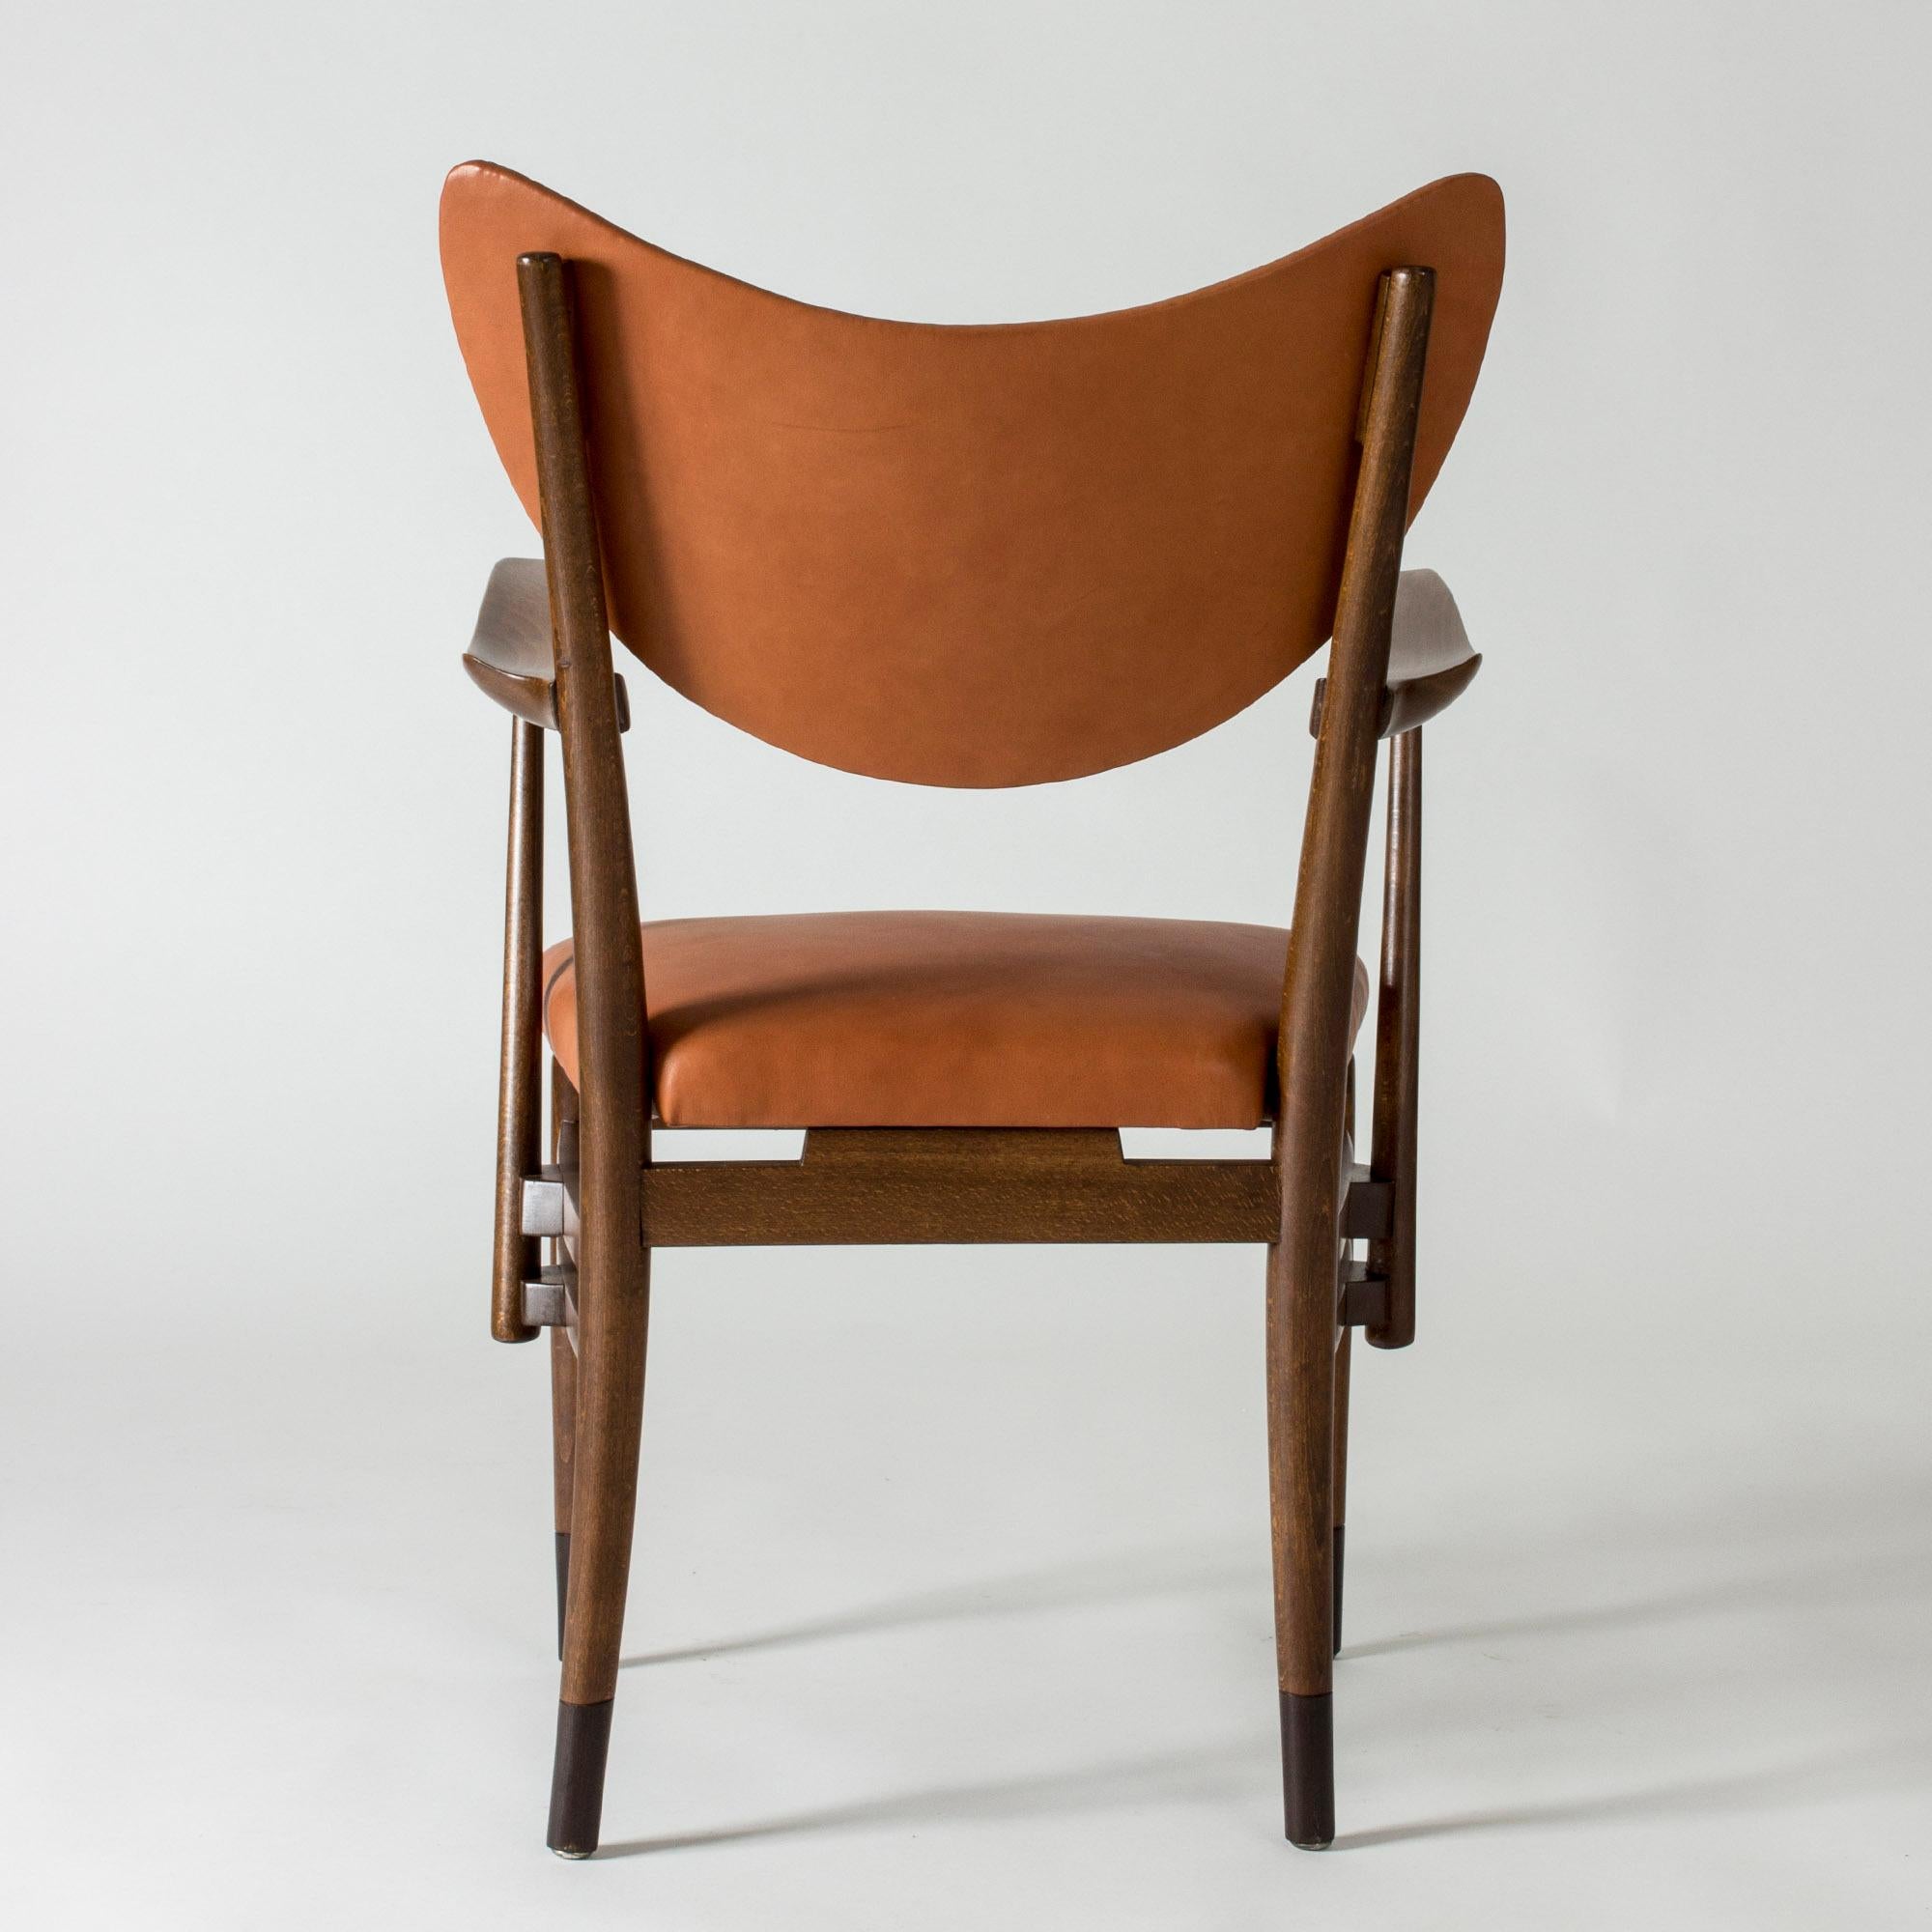 Cool and elegant armchair, attributed to Eva and Nils Koppel. Stained wooden frame with sculpted armrests, boldly curved backrest. Seat and back dressed with supple cognac brown leather.